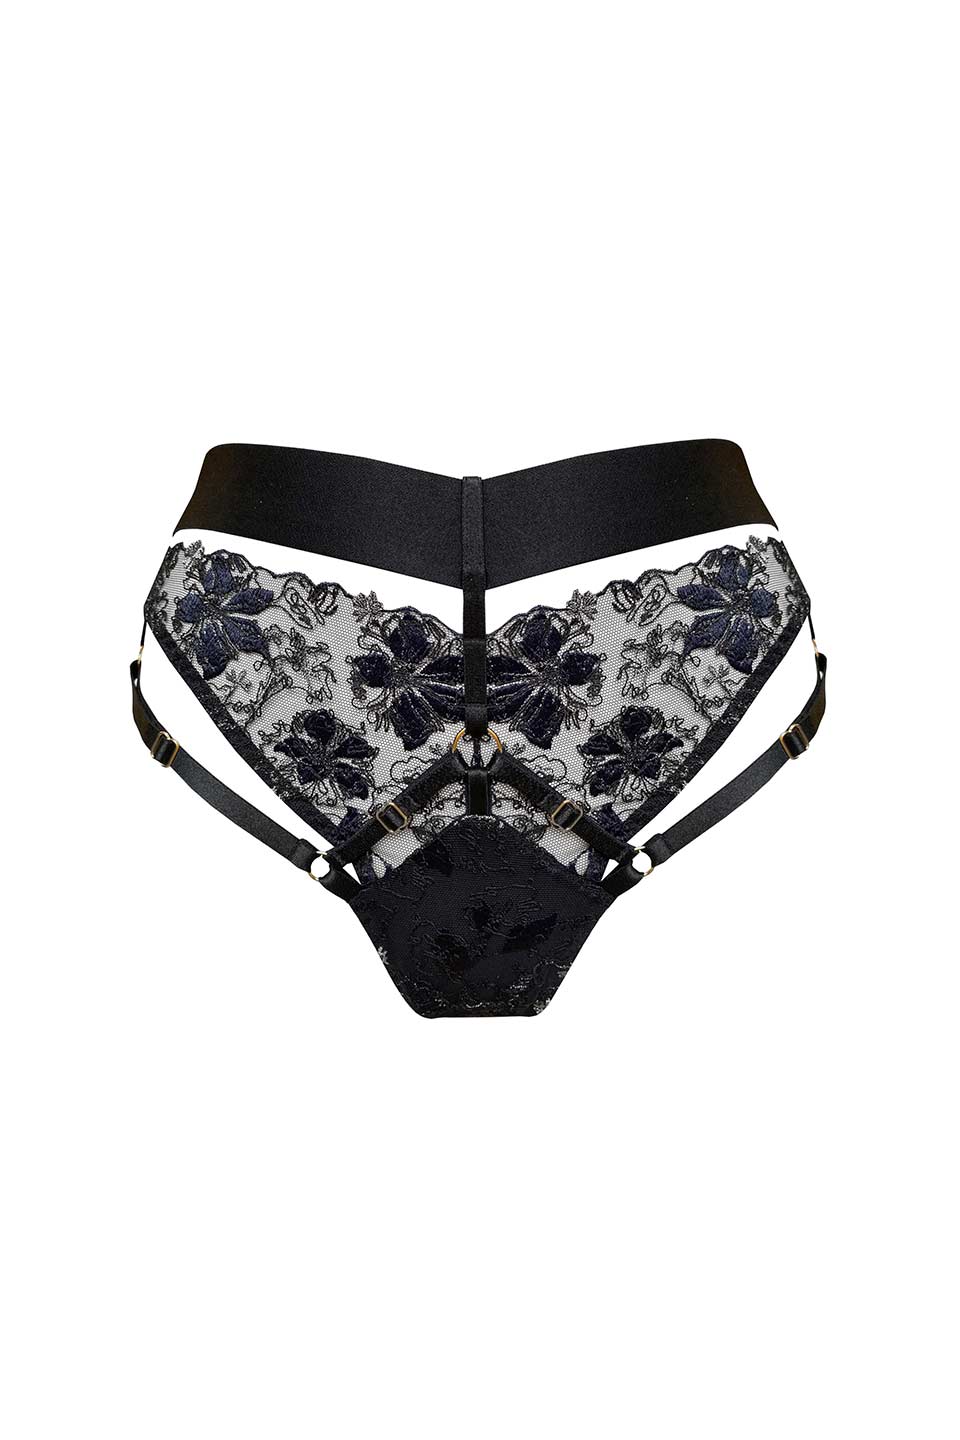 Thumbnail for Product gallery 1, Atelier bordelle vita high waist thong black front